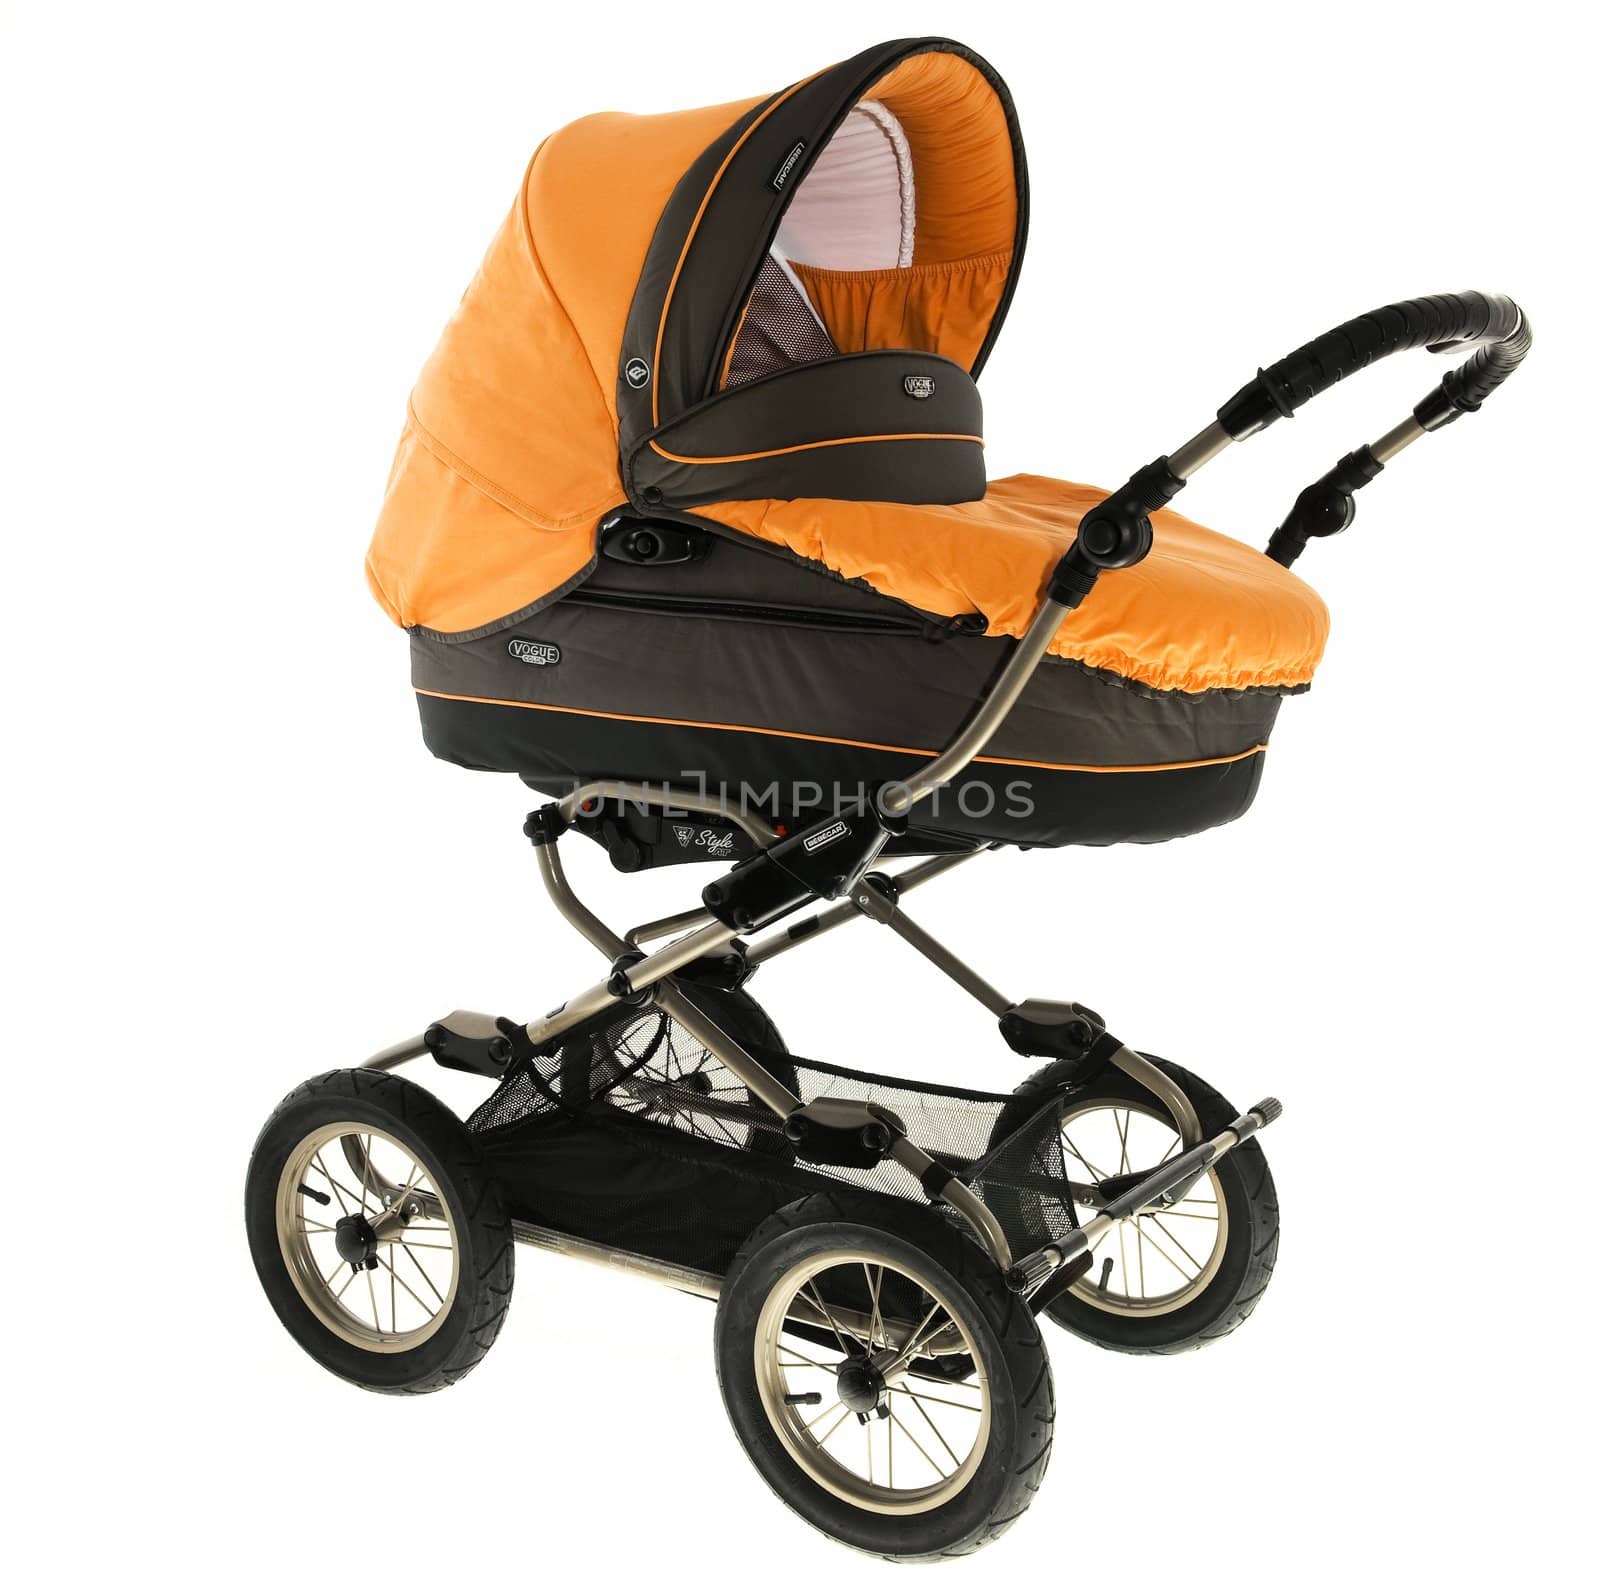 Orange baby stroller isolated in a white background